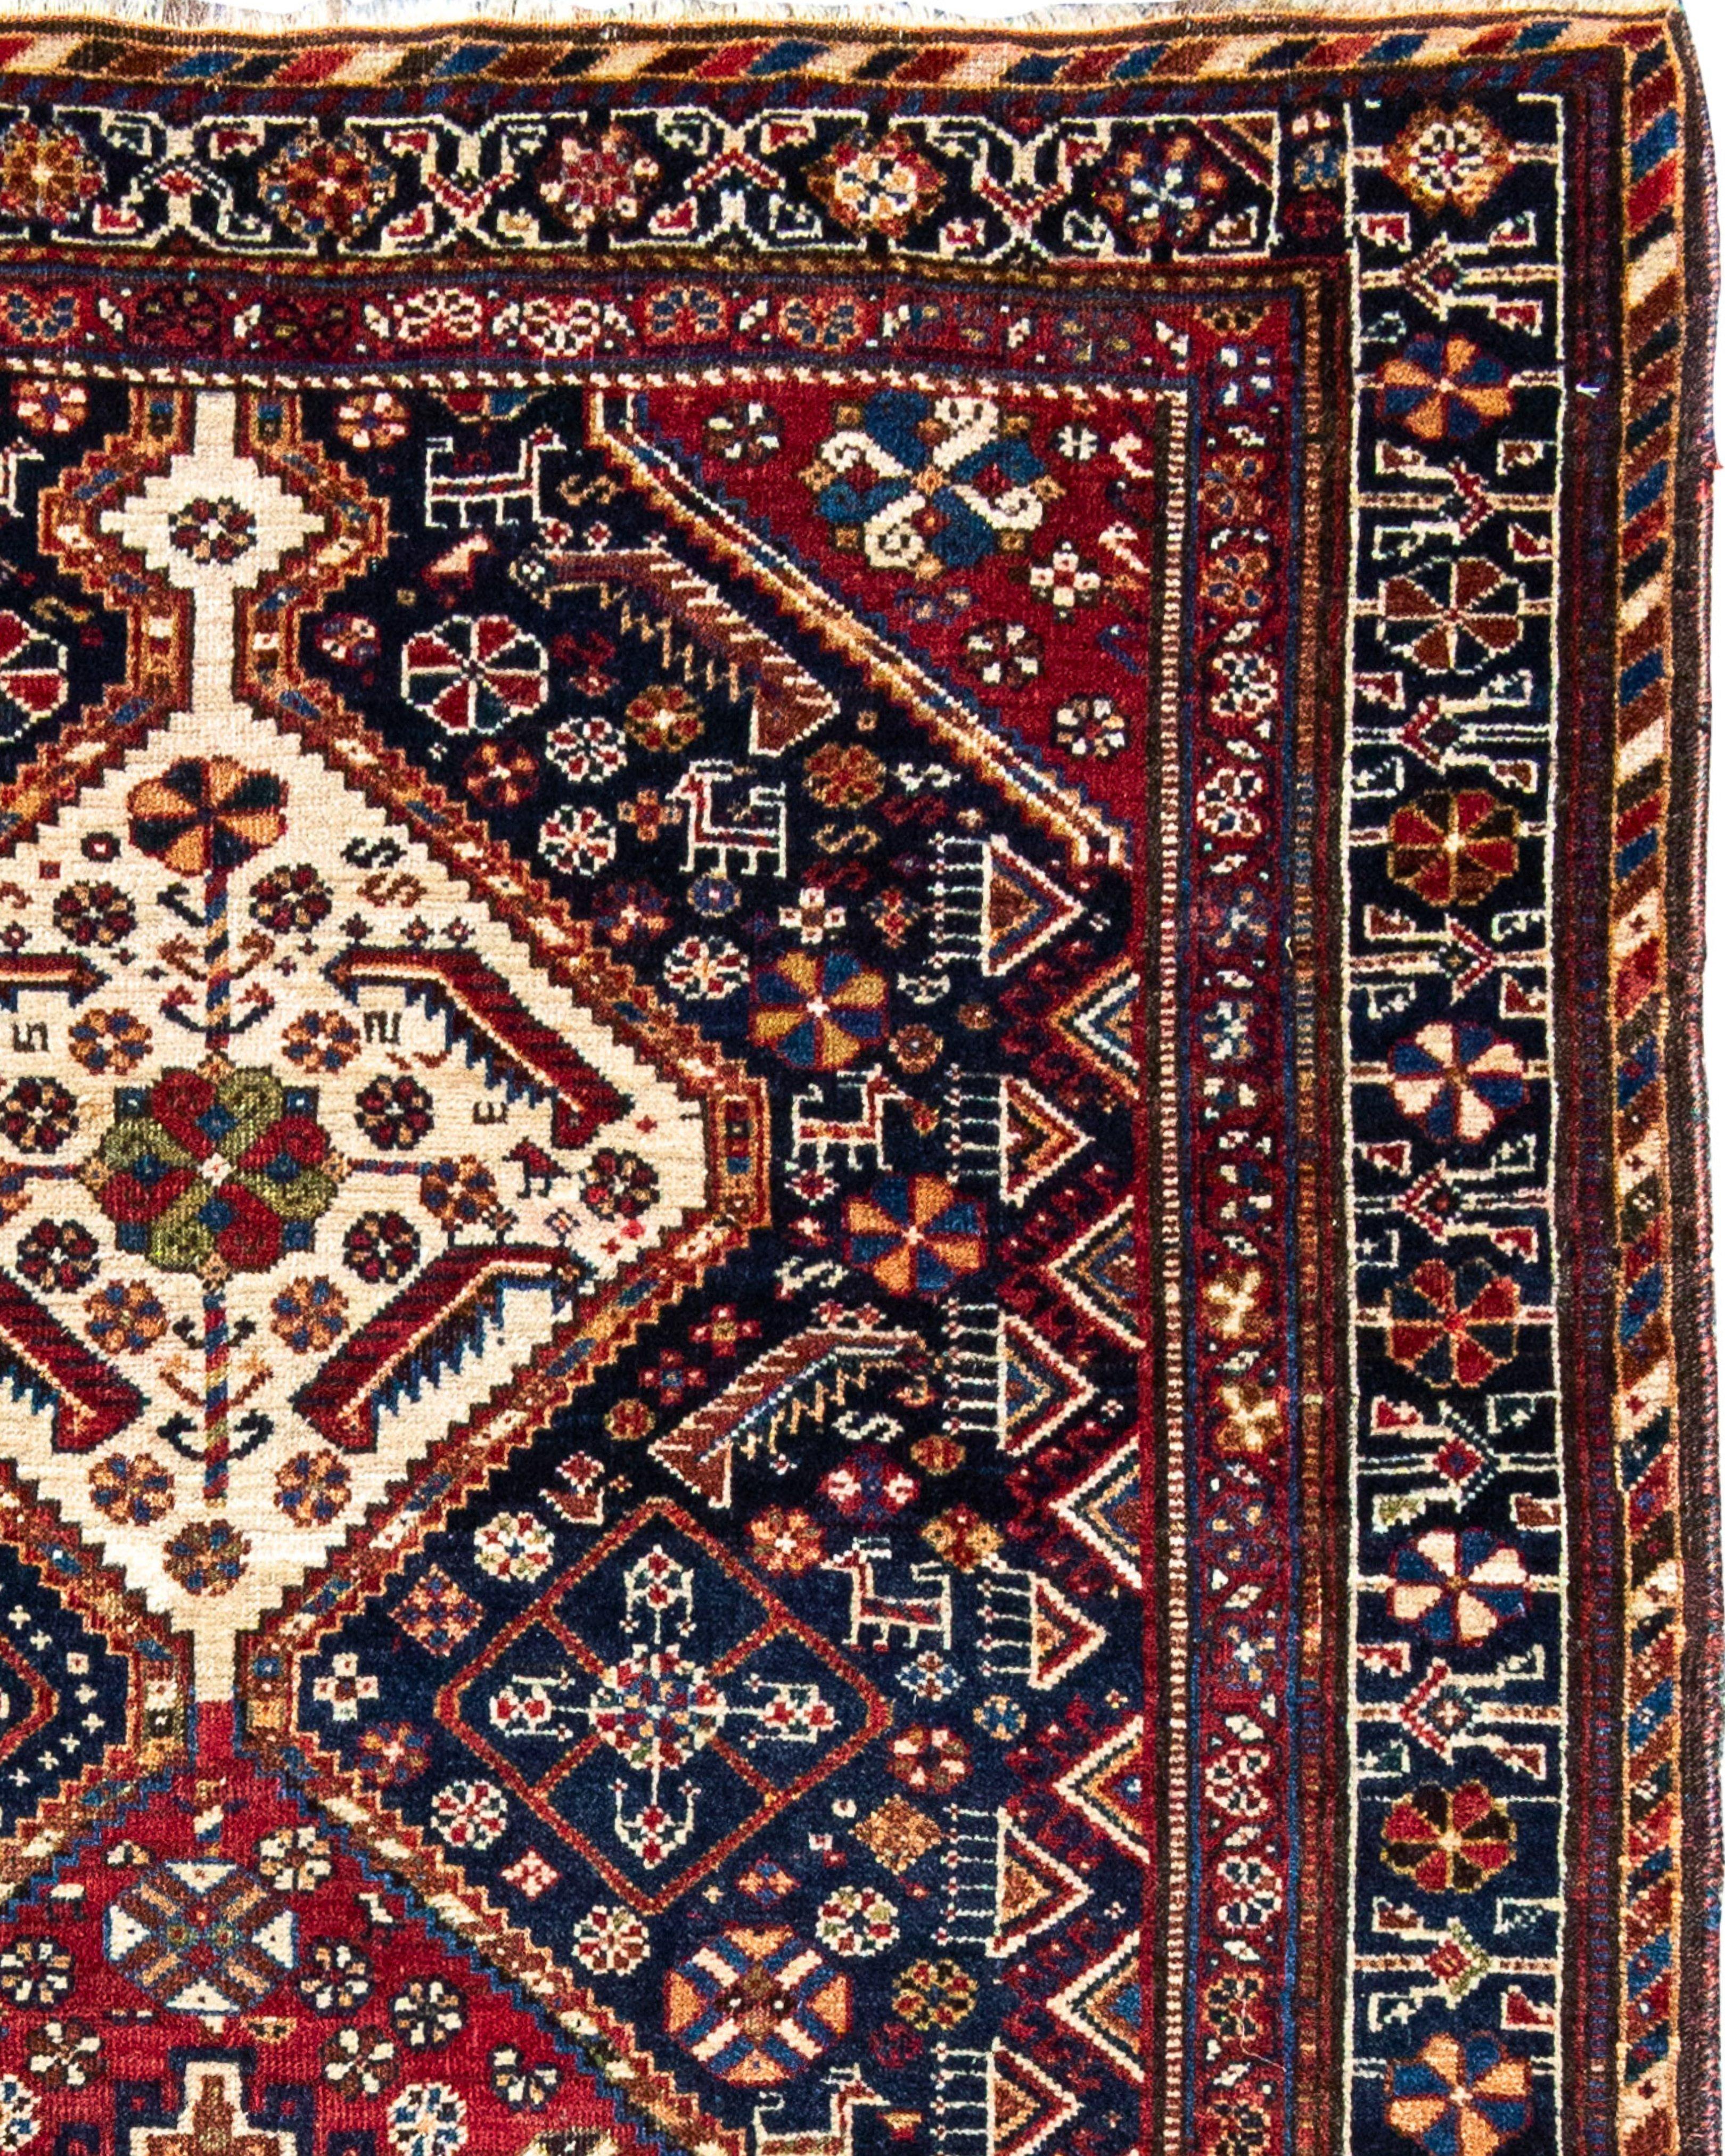 Hand-Woven Antique Persian Qashqai Rug, c. 1900 For Sale